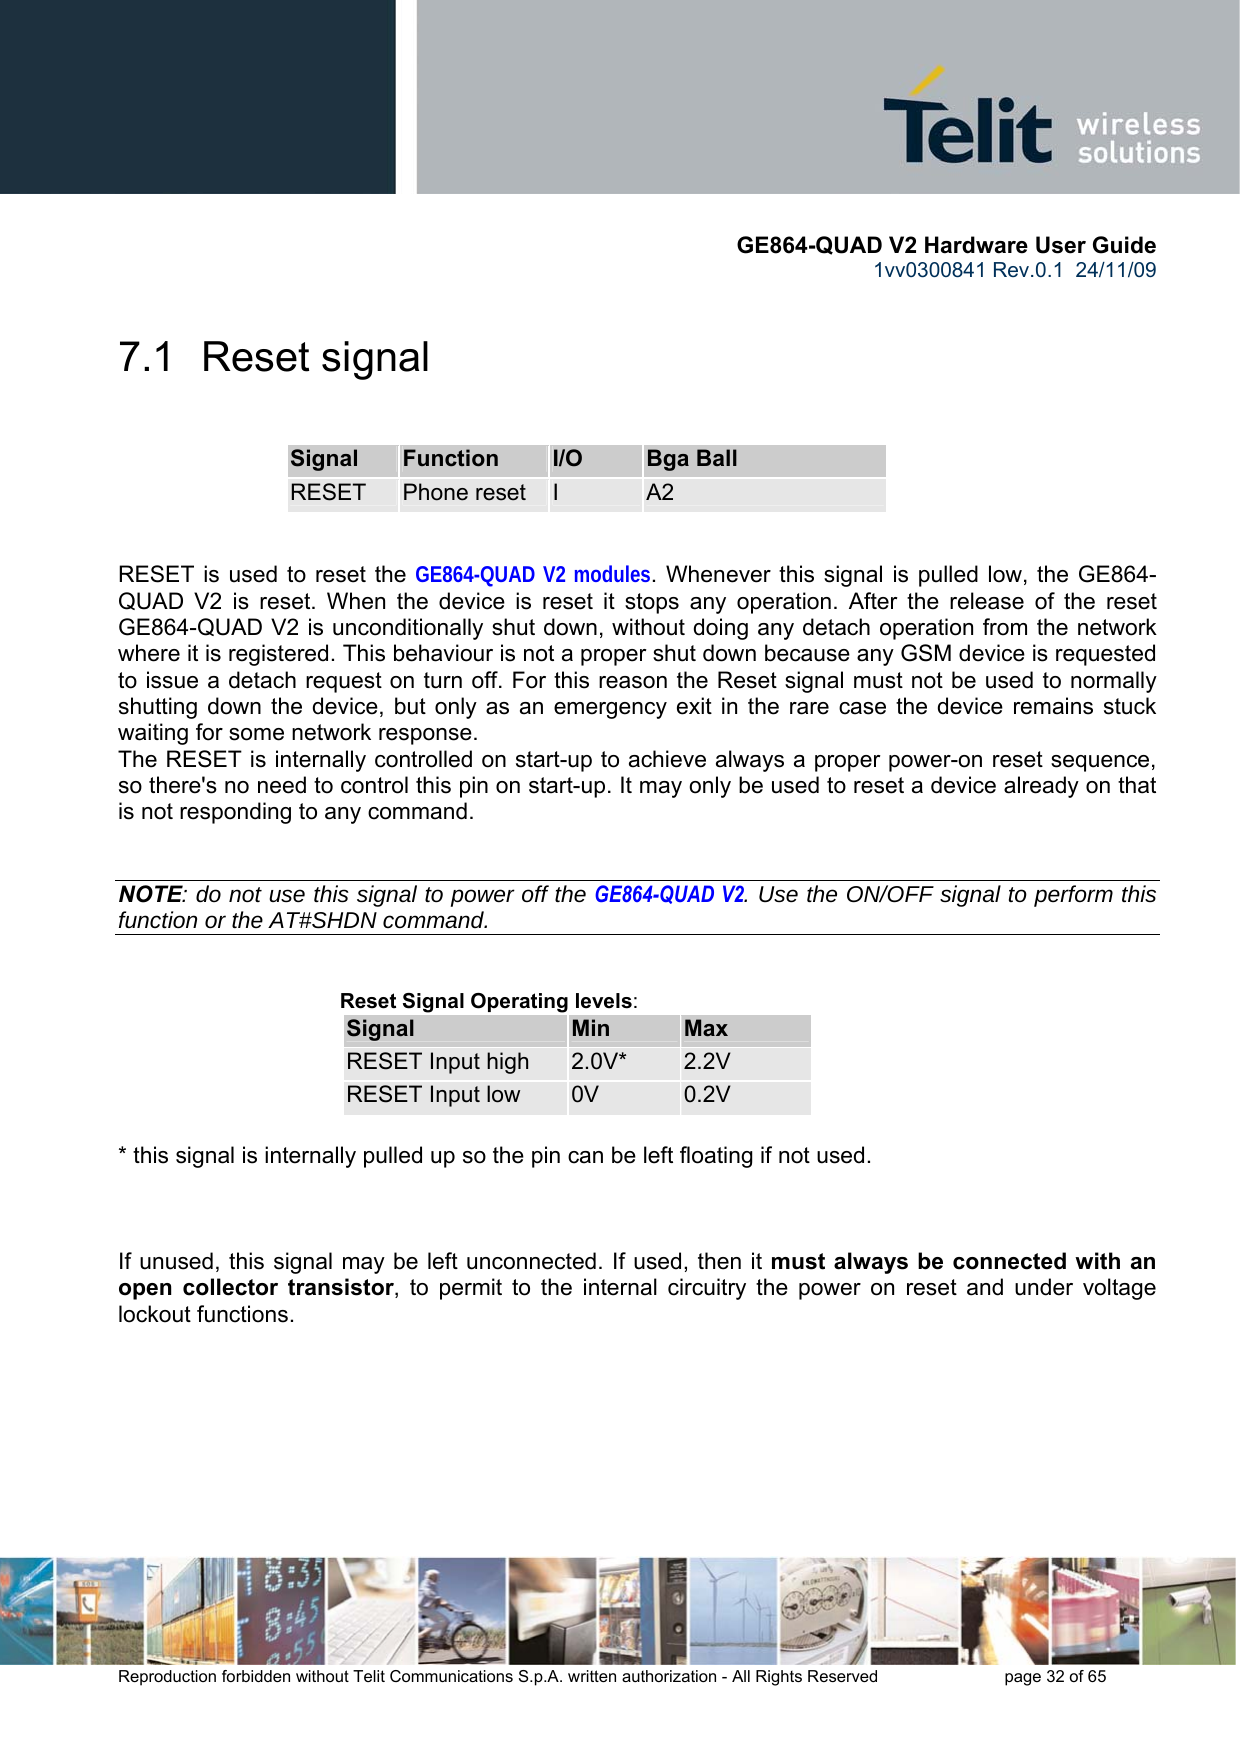       GE864-QUAD V2 Hardware User Guide 1vv0300841 Rev.0.1  24/11/09      Reproduction forbidden without Telit Communications S.p.A. written authorization - All Rights Reserved    page 32 of 65  7.1  Reset signal  Signal  Function  I/O  Bga Ball RESET  Phone reset  I  A2   RESET is used to reset the GE864-QUAD V2 modules. Whenever this signal is pulled low, the GE864-QUAD V2 is reset. When the device is reset it stops any operation. After the release of the reset GE864-QUAD V2 is unconditionally shut down, without doing any detach operation from the network where it is registered. This behaviour is not a proper shut down because any GSM device is requested to issue a detach request on turn off. For this reason the Reset signal must not be used to normally shutting down the device, but only as an emergency exit in the rare case the device remains stuck waiting for some network response. The RESET is internally controlled on start-up to achieve always a proper power-on reset sequence, so there&apos;s no need to control this pin on start-up. It may only be used to reset a device already on that is not responding to any command.   NOTE: do not use this signal to power off the GE864-QUAD V2. Use the ON/OFF signal to perform this function or the AT#SHDN command.   Reset Signal Operating levels: Signal  Min  Max RESET Input high  2.0V*  2.2V RESET Input low  0V  0.2V  * this signal is internally pulled up so the pin can be left floating if not used.    If unused, this signal may be left unconnected. If used, then it must always be connected with an open collector transistor, to permit to the internal circuitry the power on reset and under voltage lockout functions.        